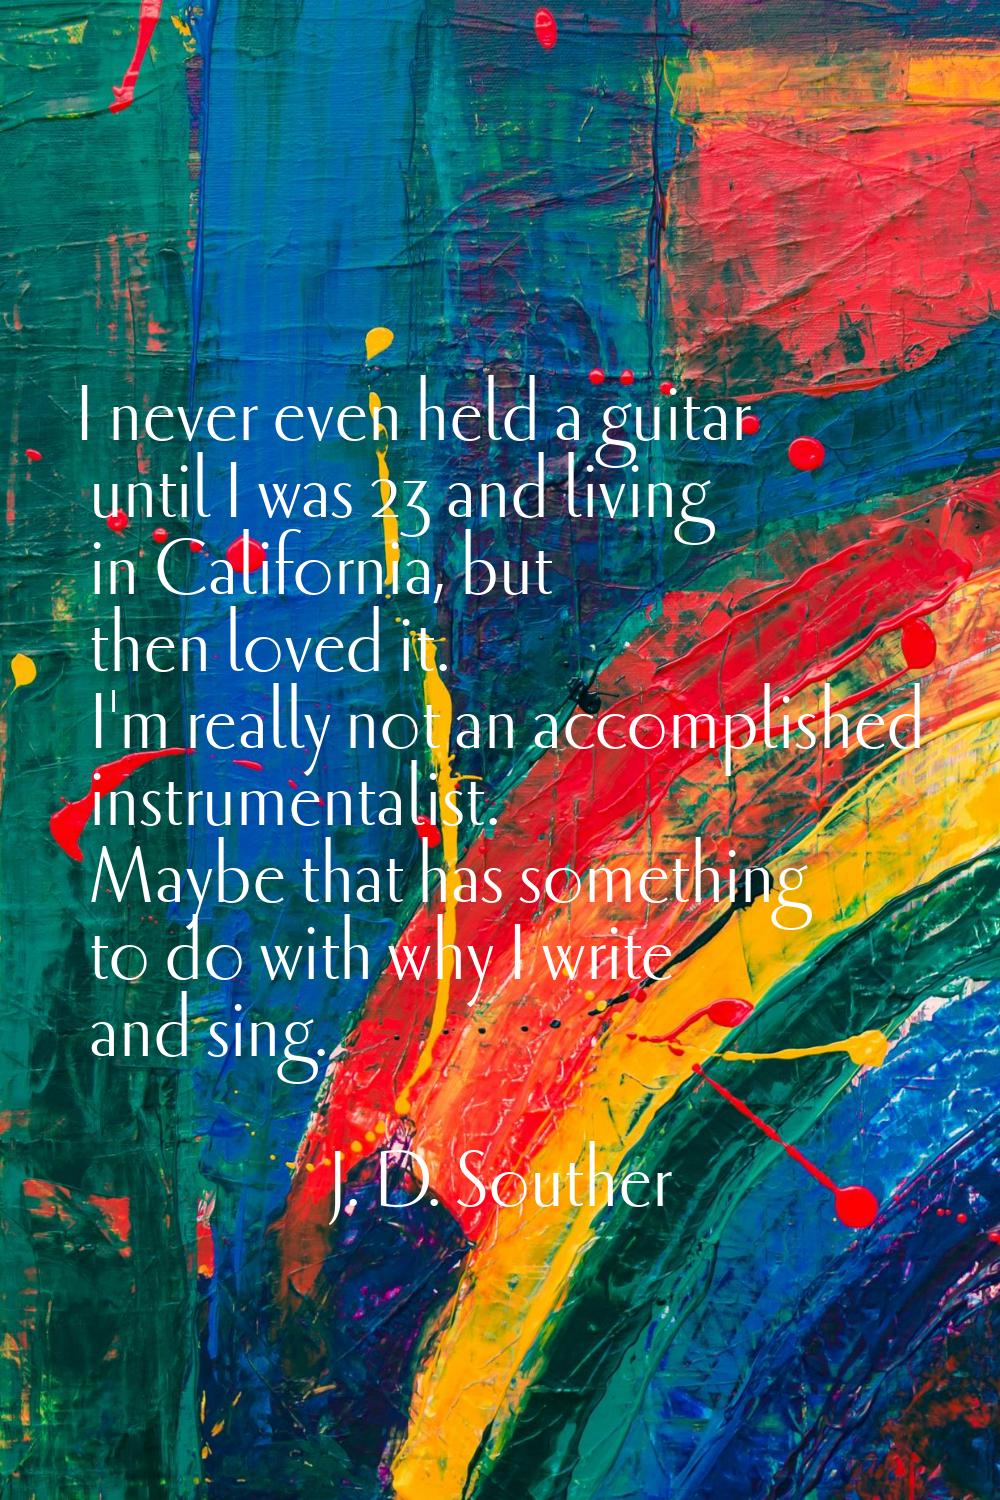 I never even held a guitar until I was 23 and living in California, but then loved it. I'm really n